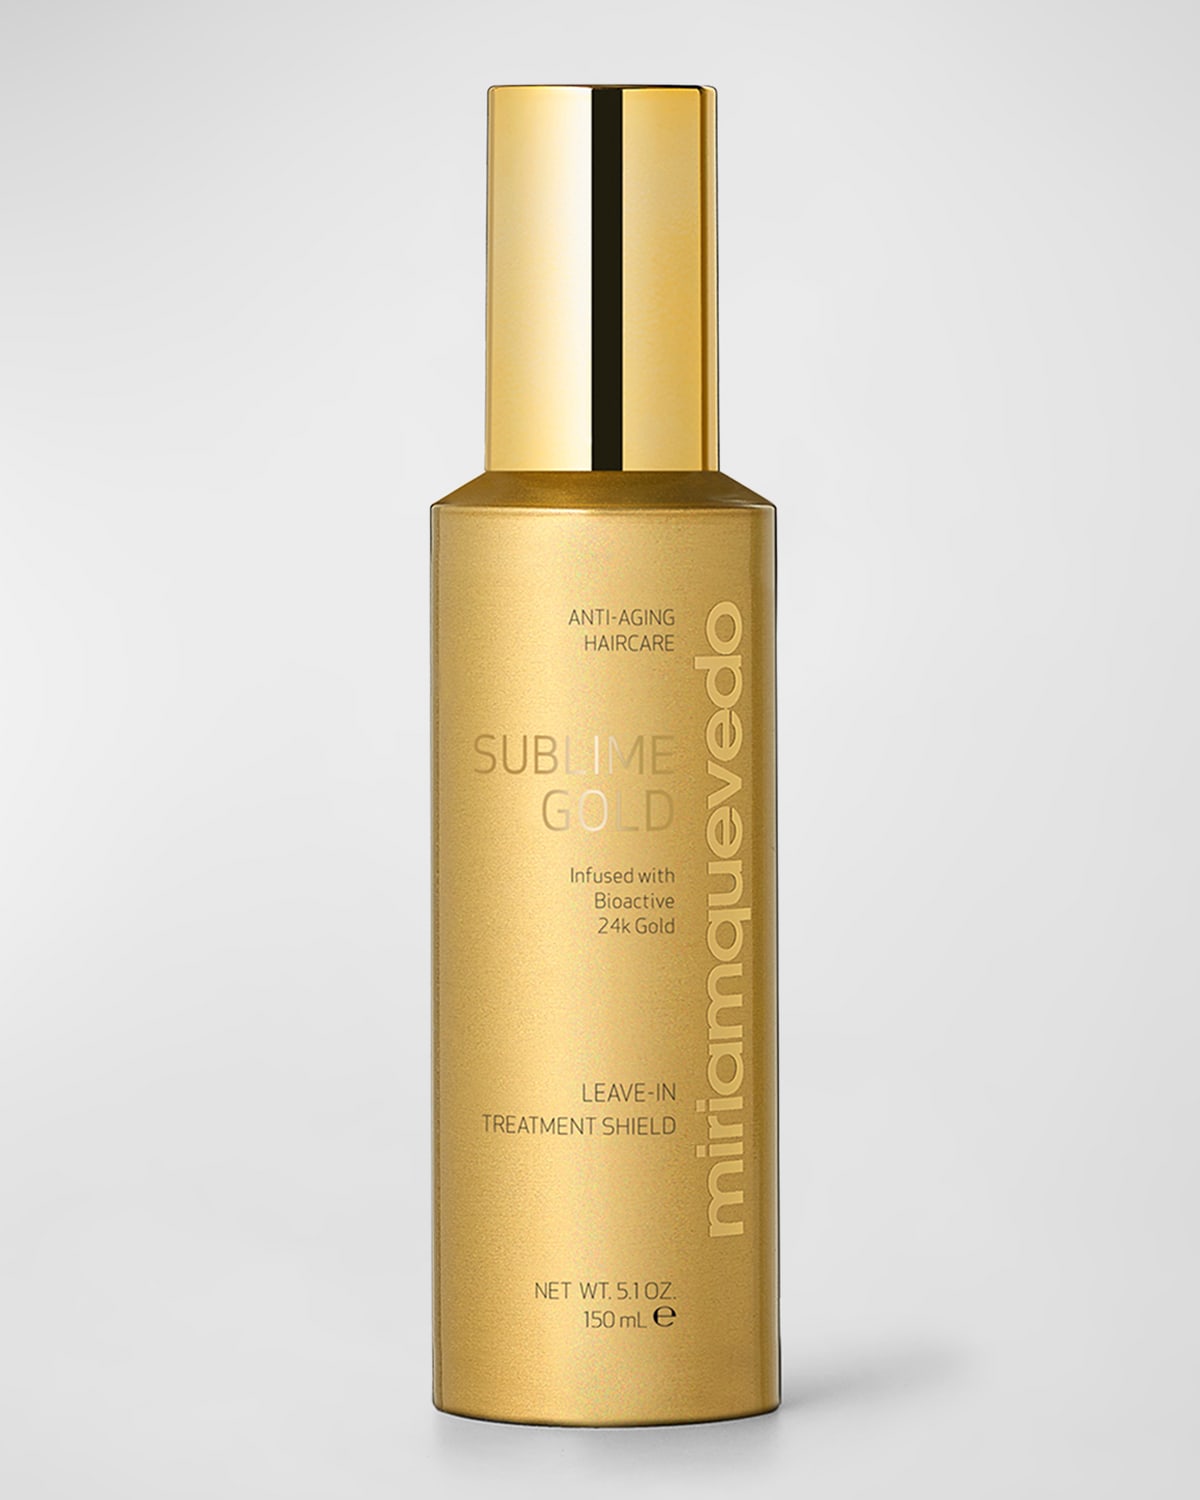 5 oz. Sublime Gold Leave-In Treatment Shield